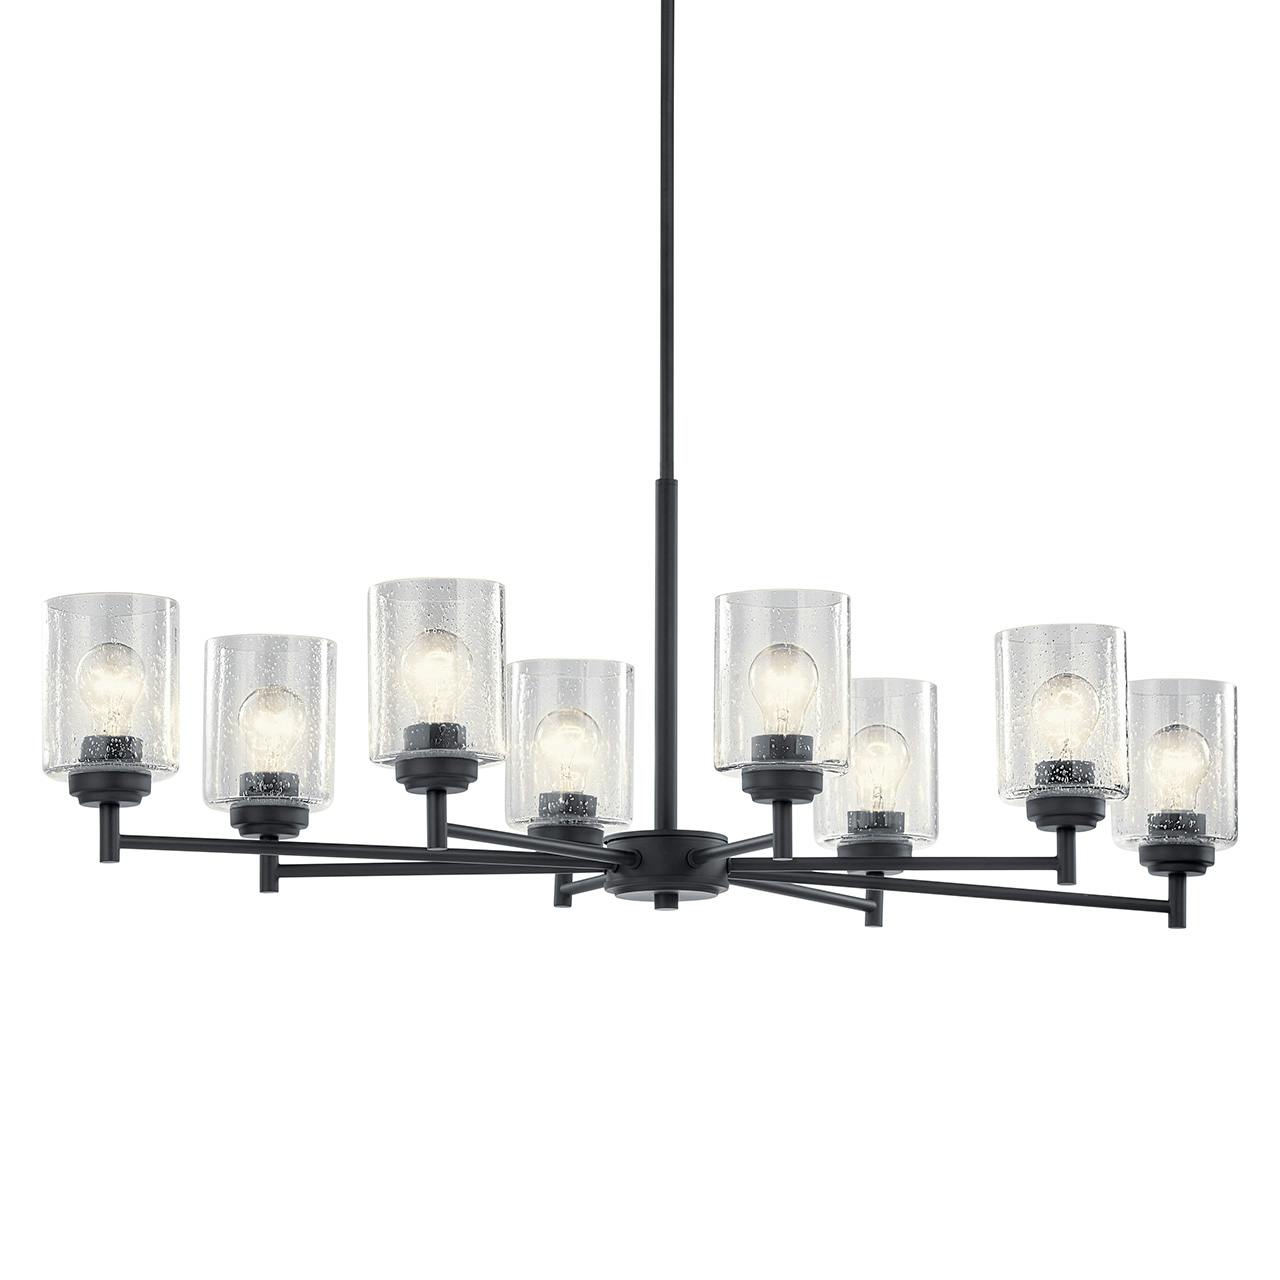 Winslow™ 8 Light Chandelier Black without the canopy on a white background